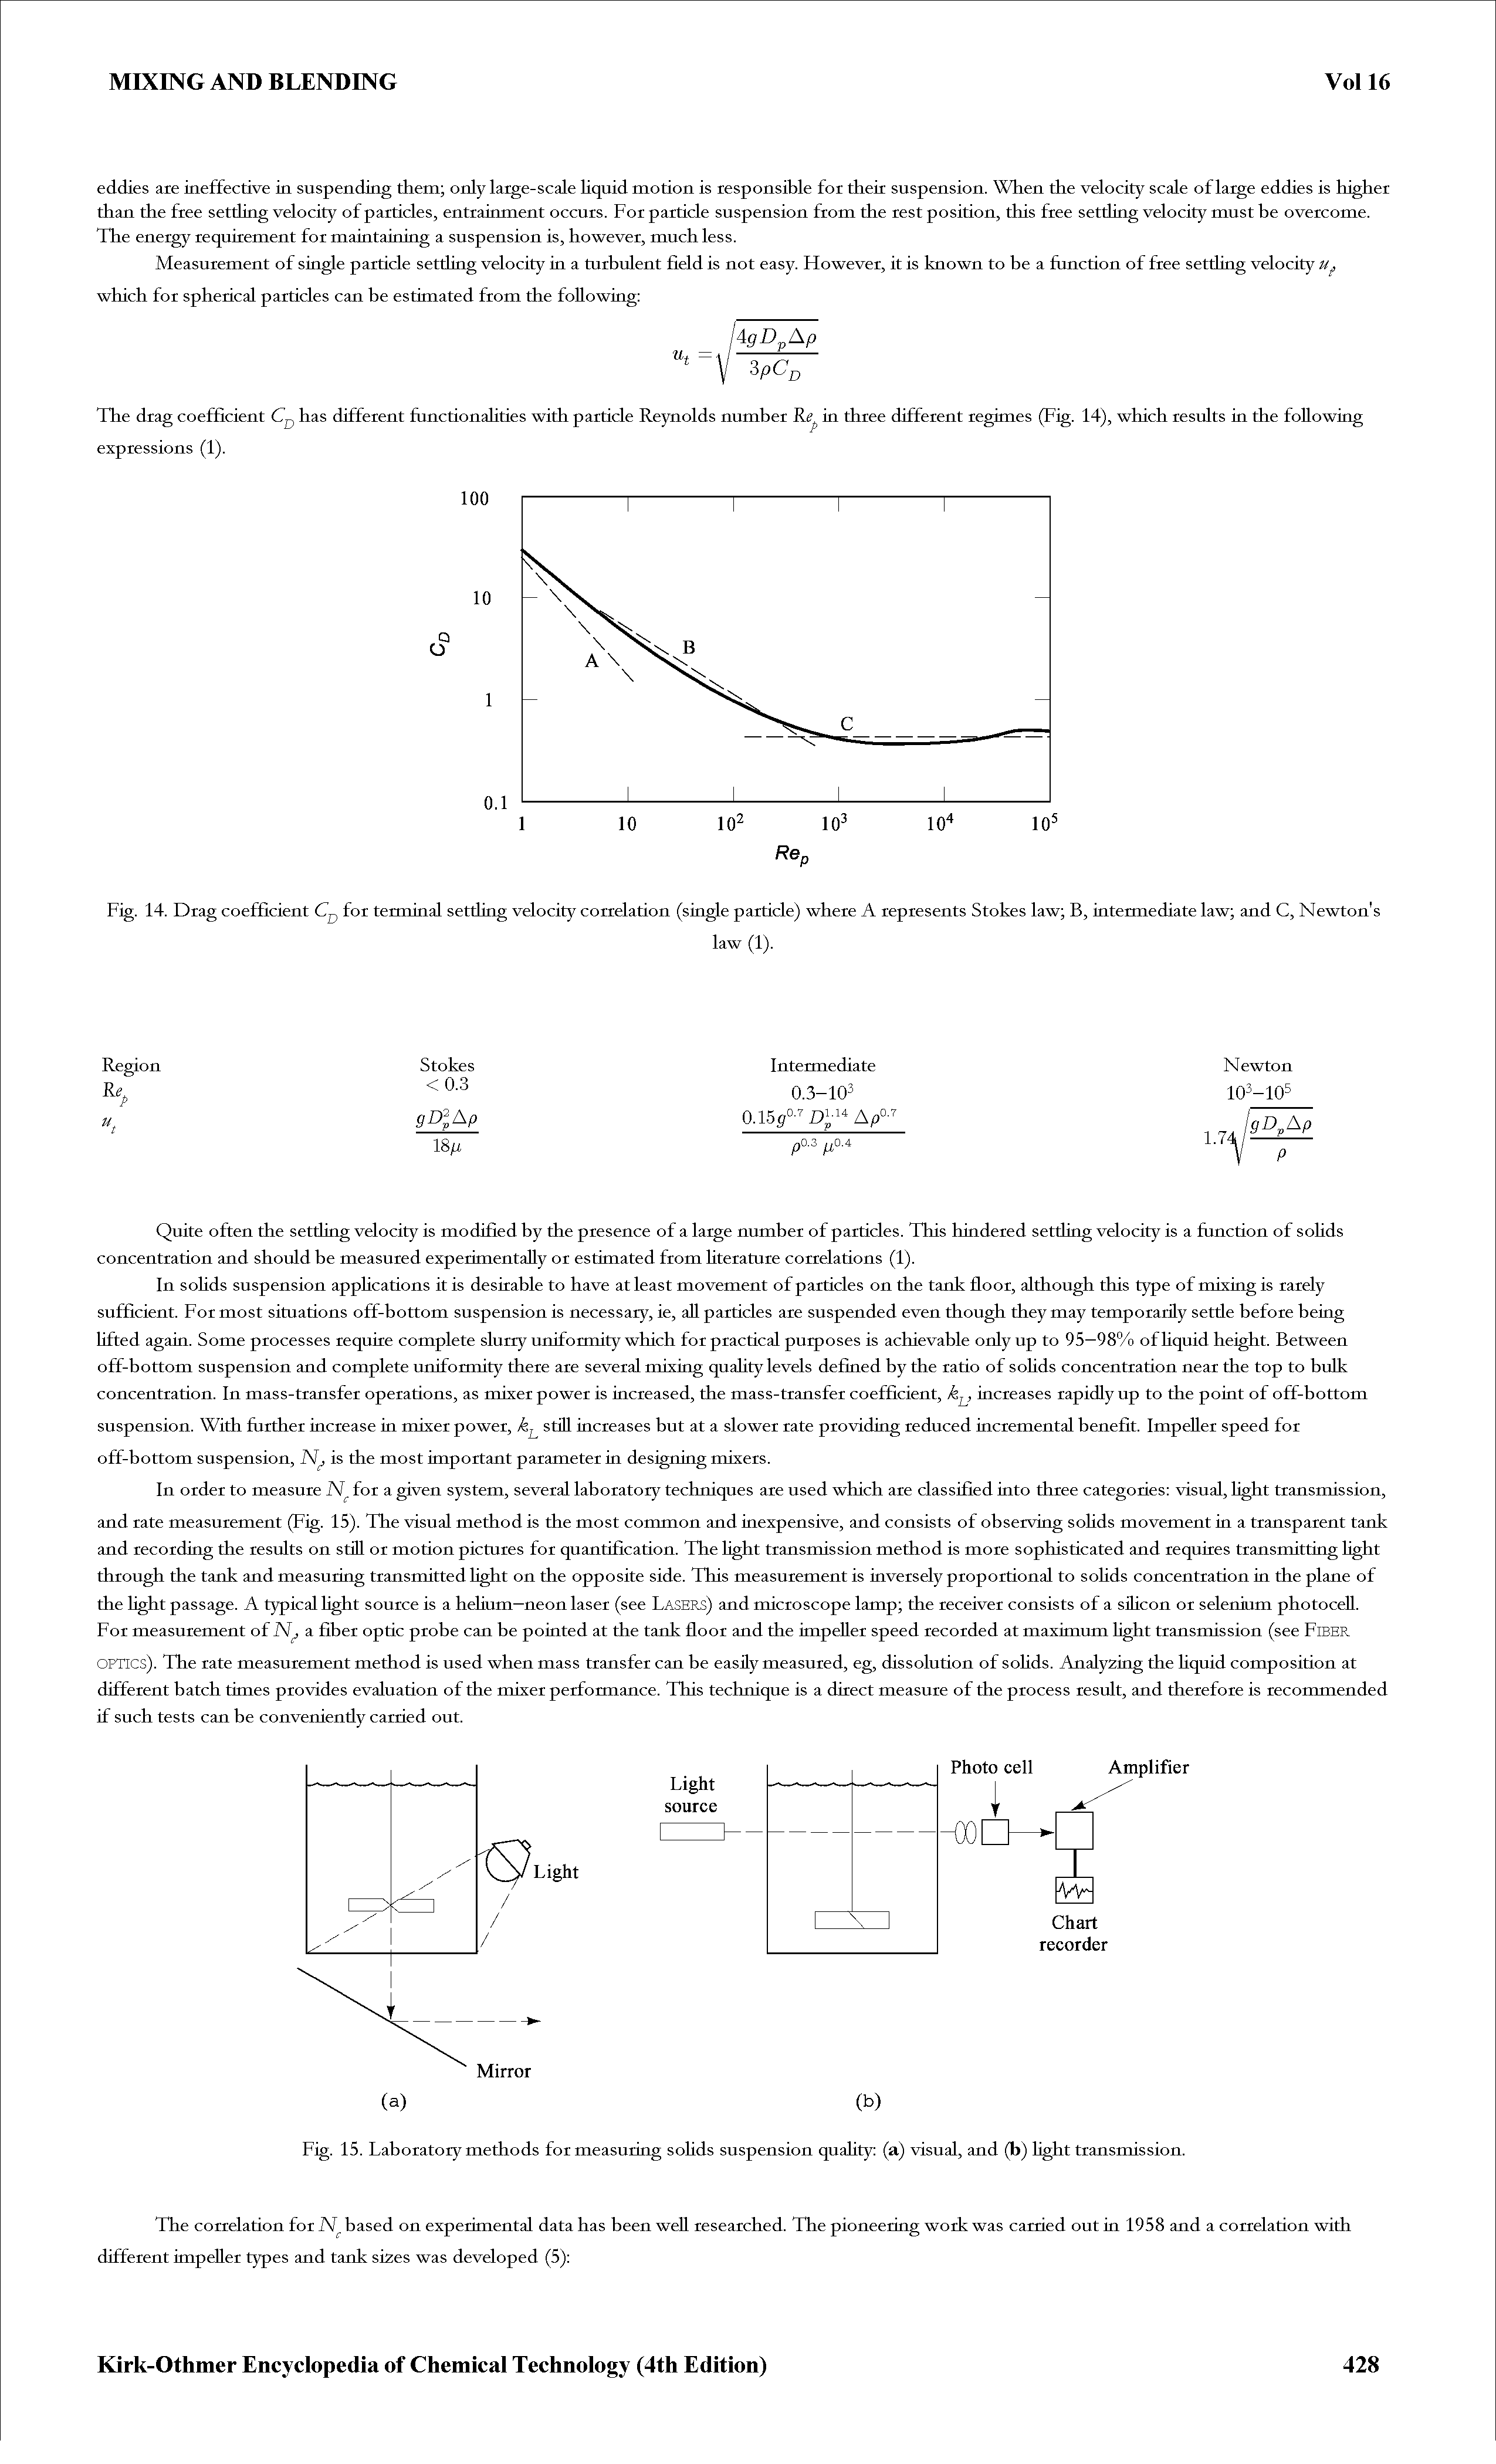 Fig. 14. Drag coefficient for terminal settling velocity correlation (single particle) where A represents Stokes law B, intermediate law and C, Newton s...